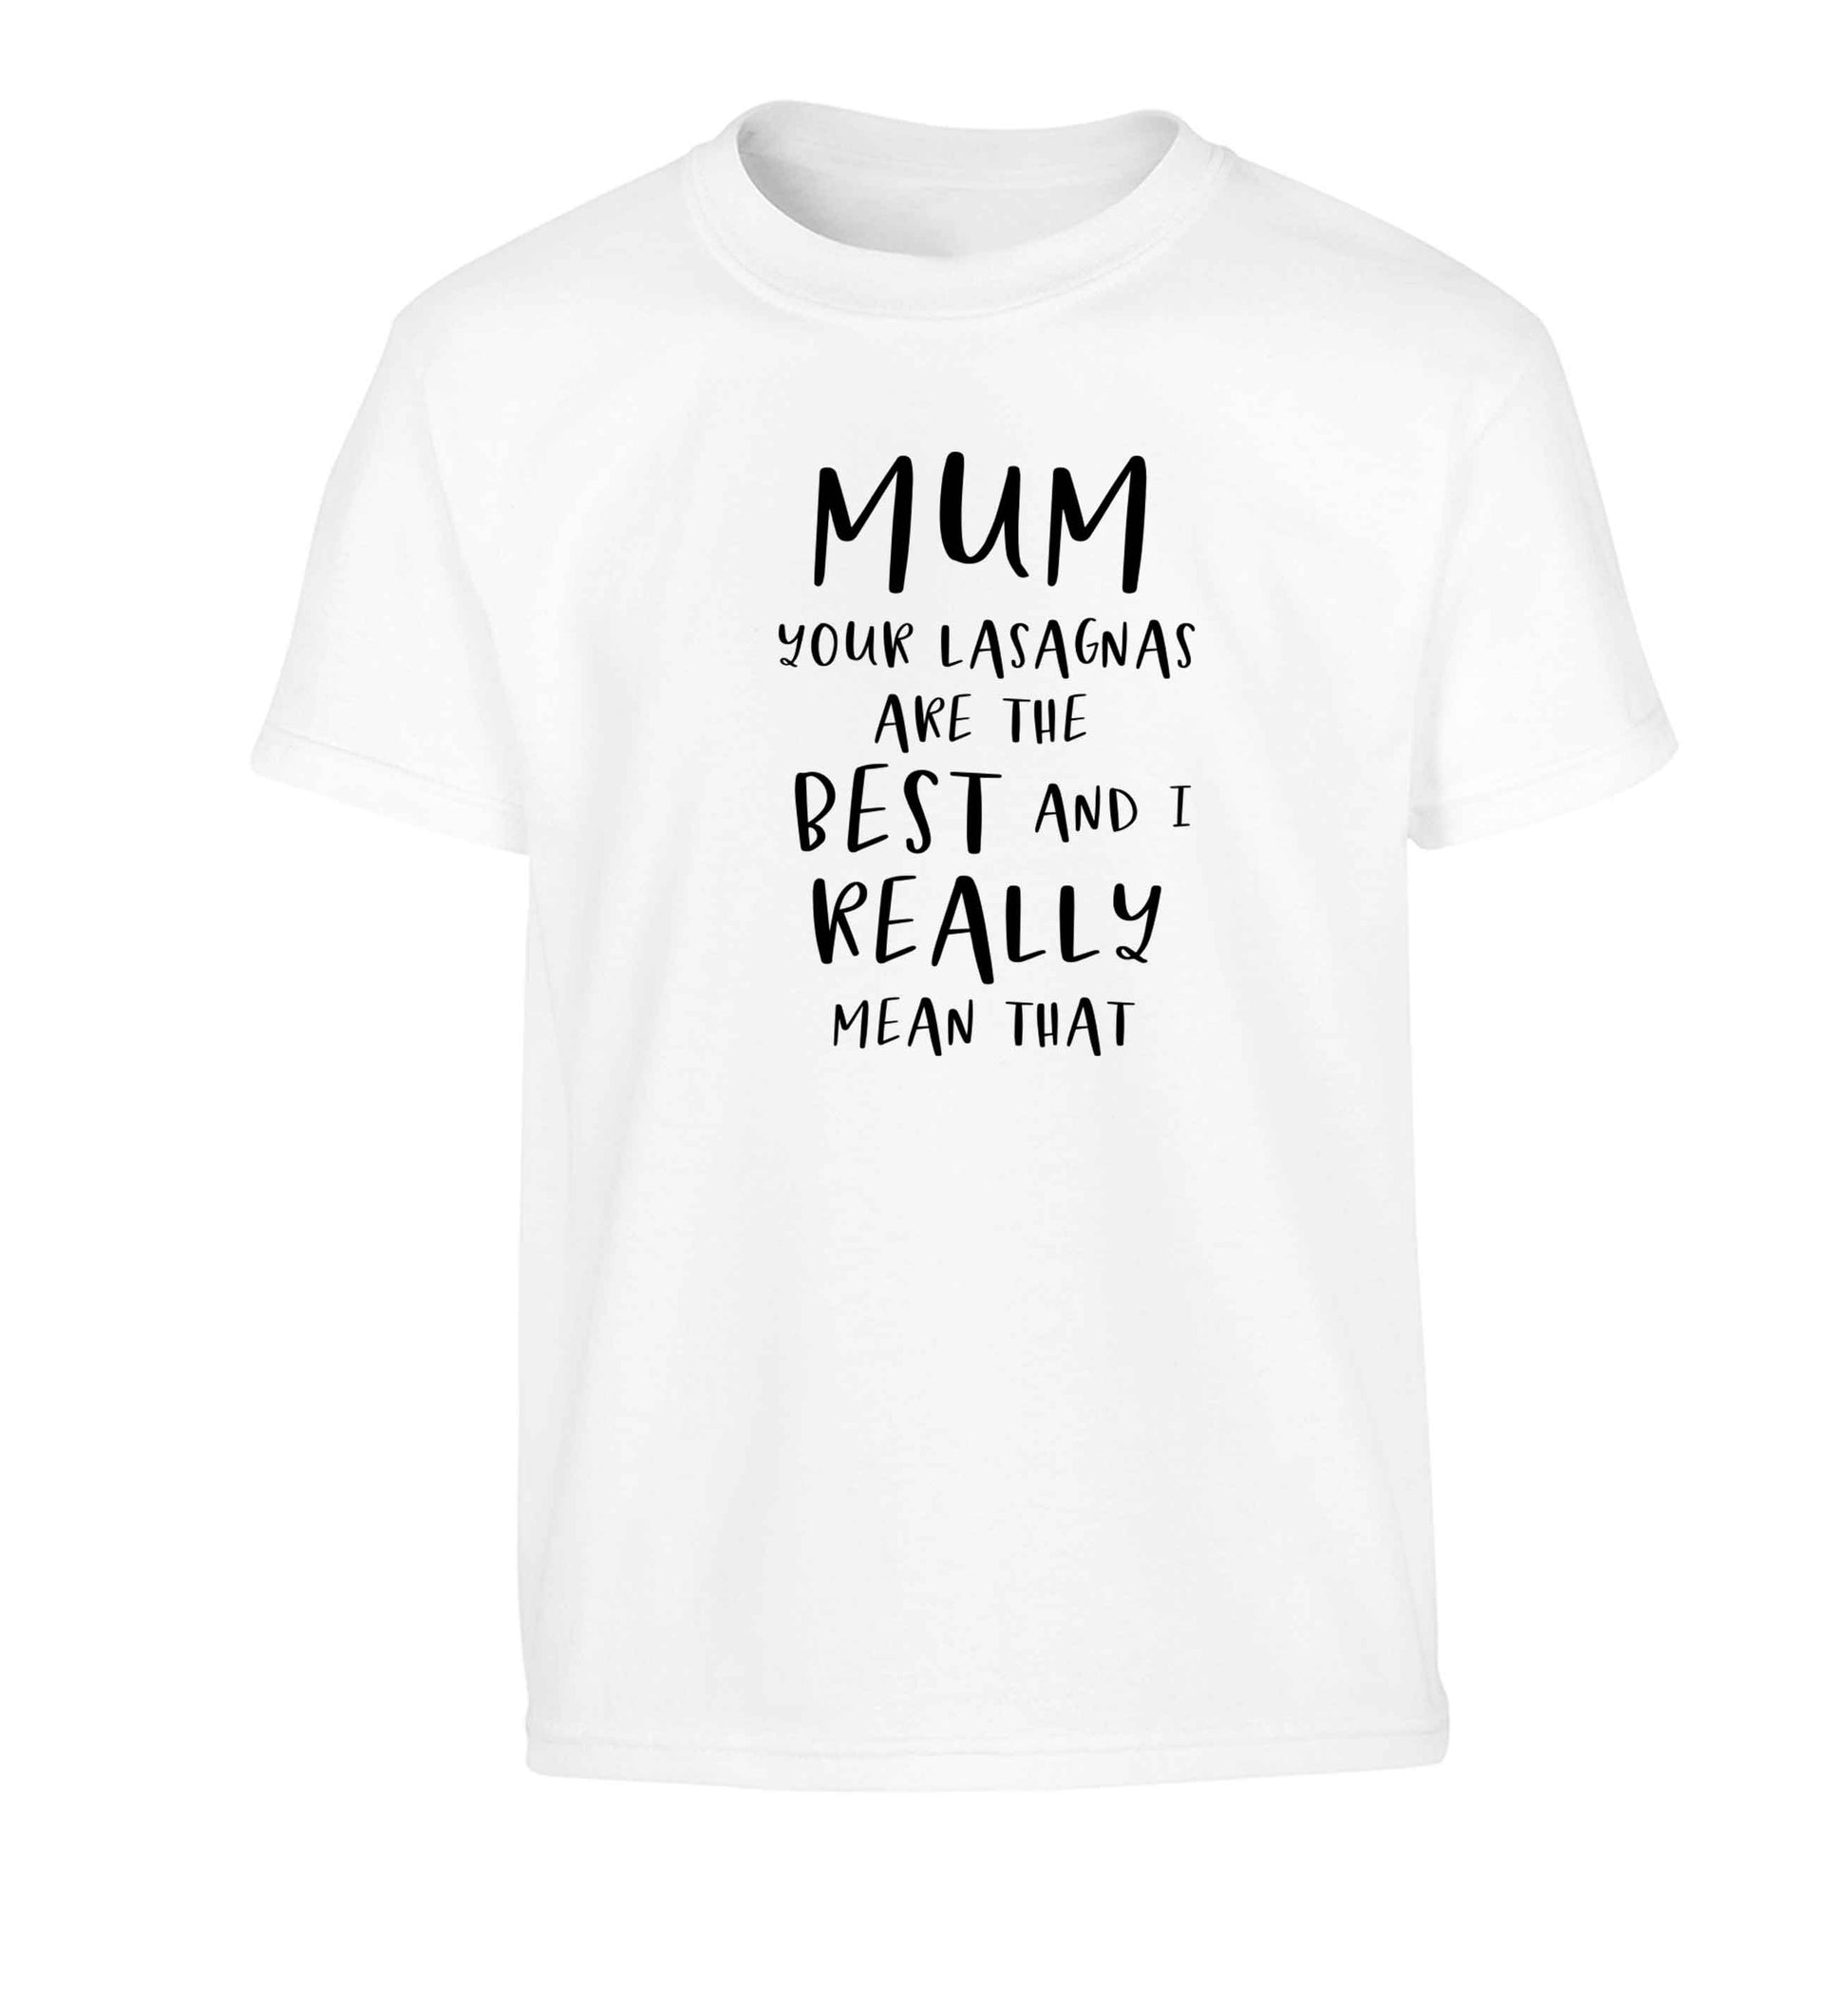 Funny gifts for your mum on mother's dayor her birthday! Mum your lasagnas are the best and I really mean that Children's white Tshirt 12-13 Years